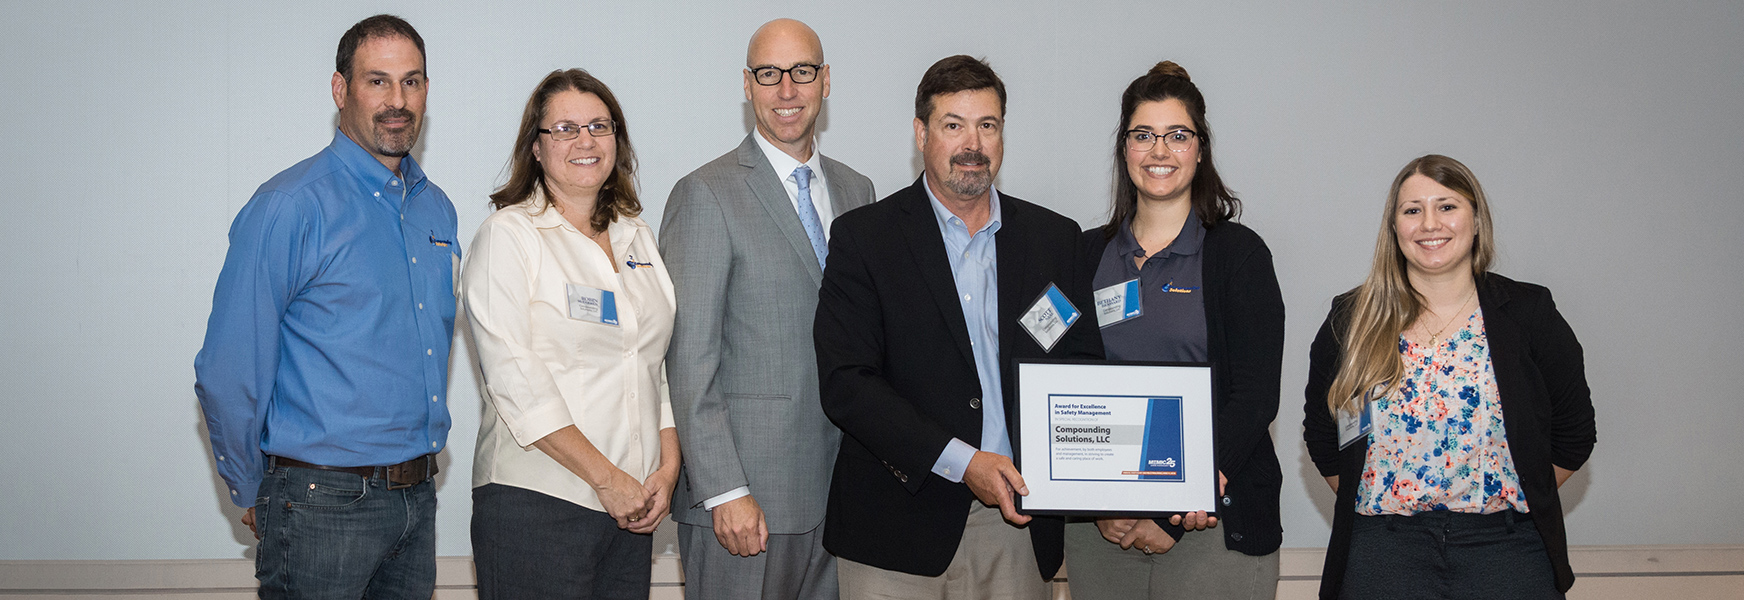 Compound Solutions honored with safety award at MEMIC